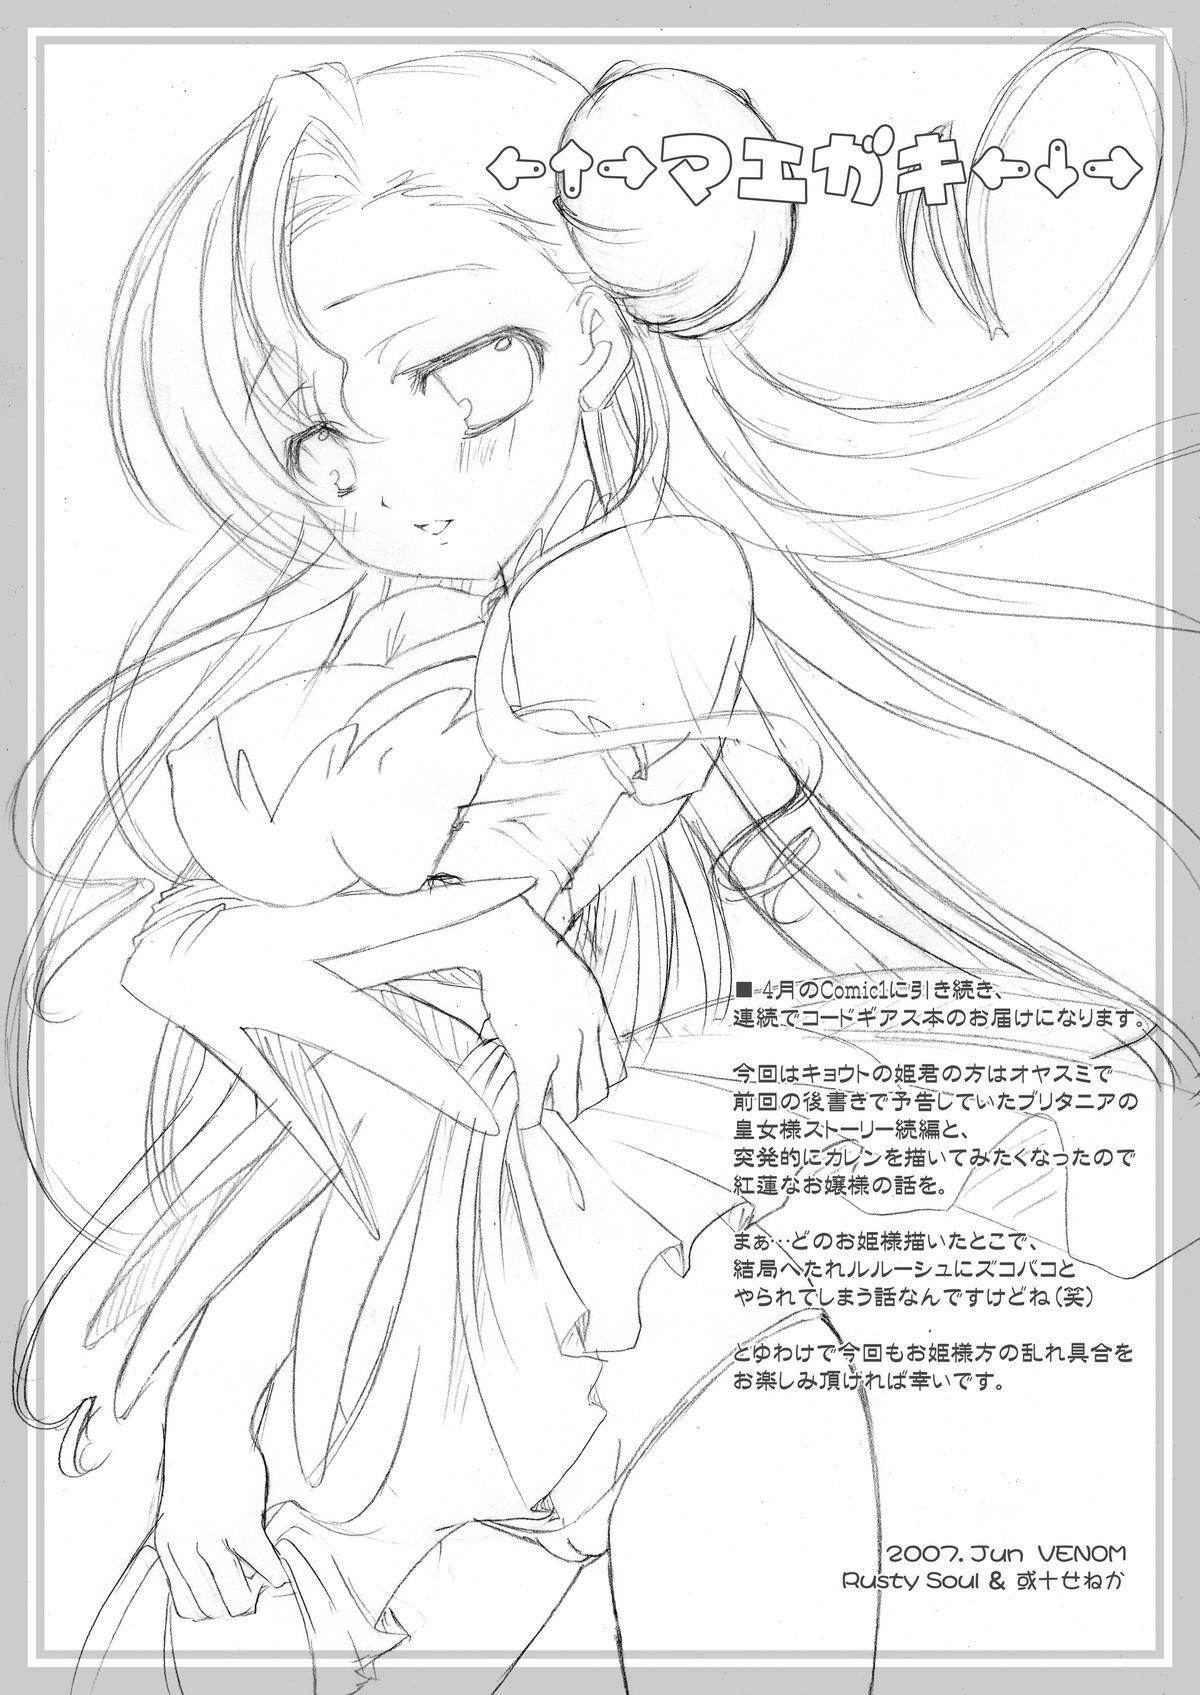 Doggy Kouhime Benihime - Code geass Exhib - Page 4